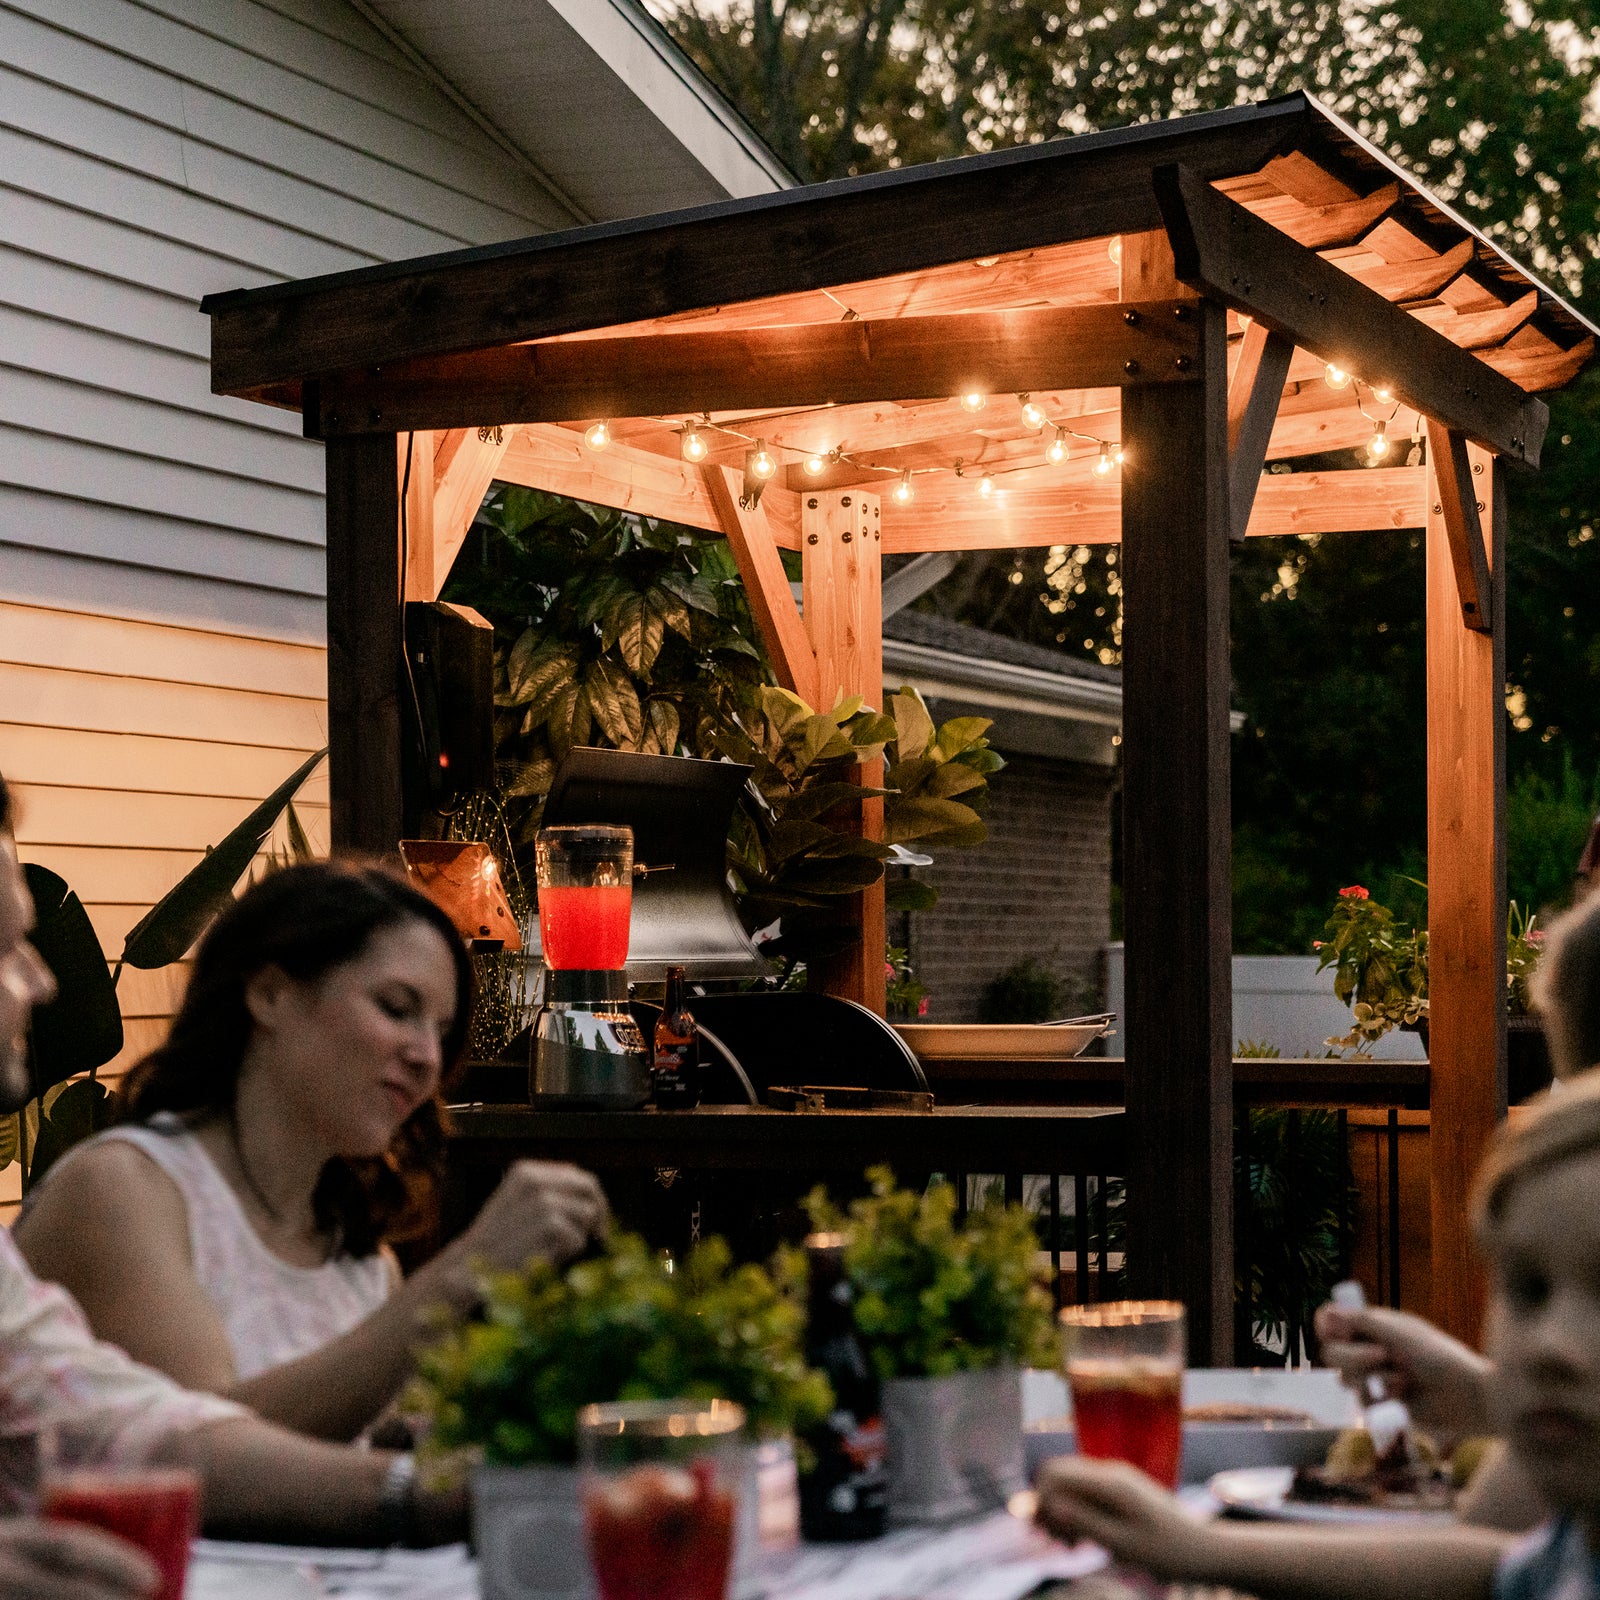 Load image into Gallery viewer, Saxony Grill Gazebo placed on deck for outdoor dinner party
